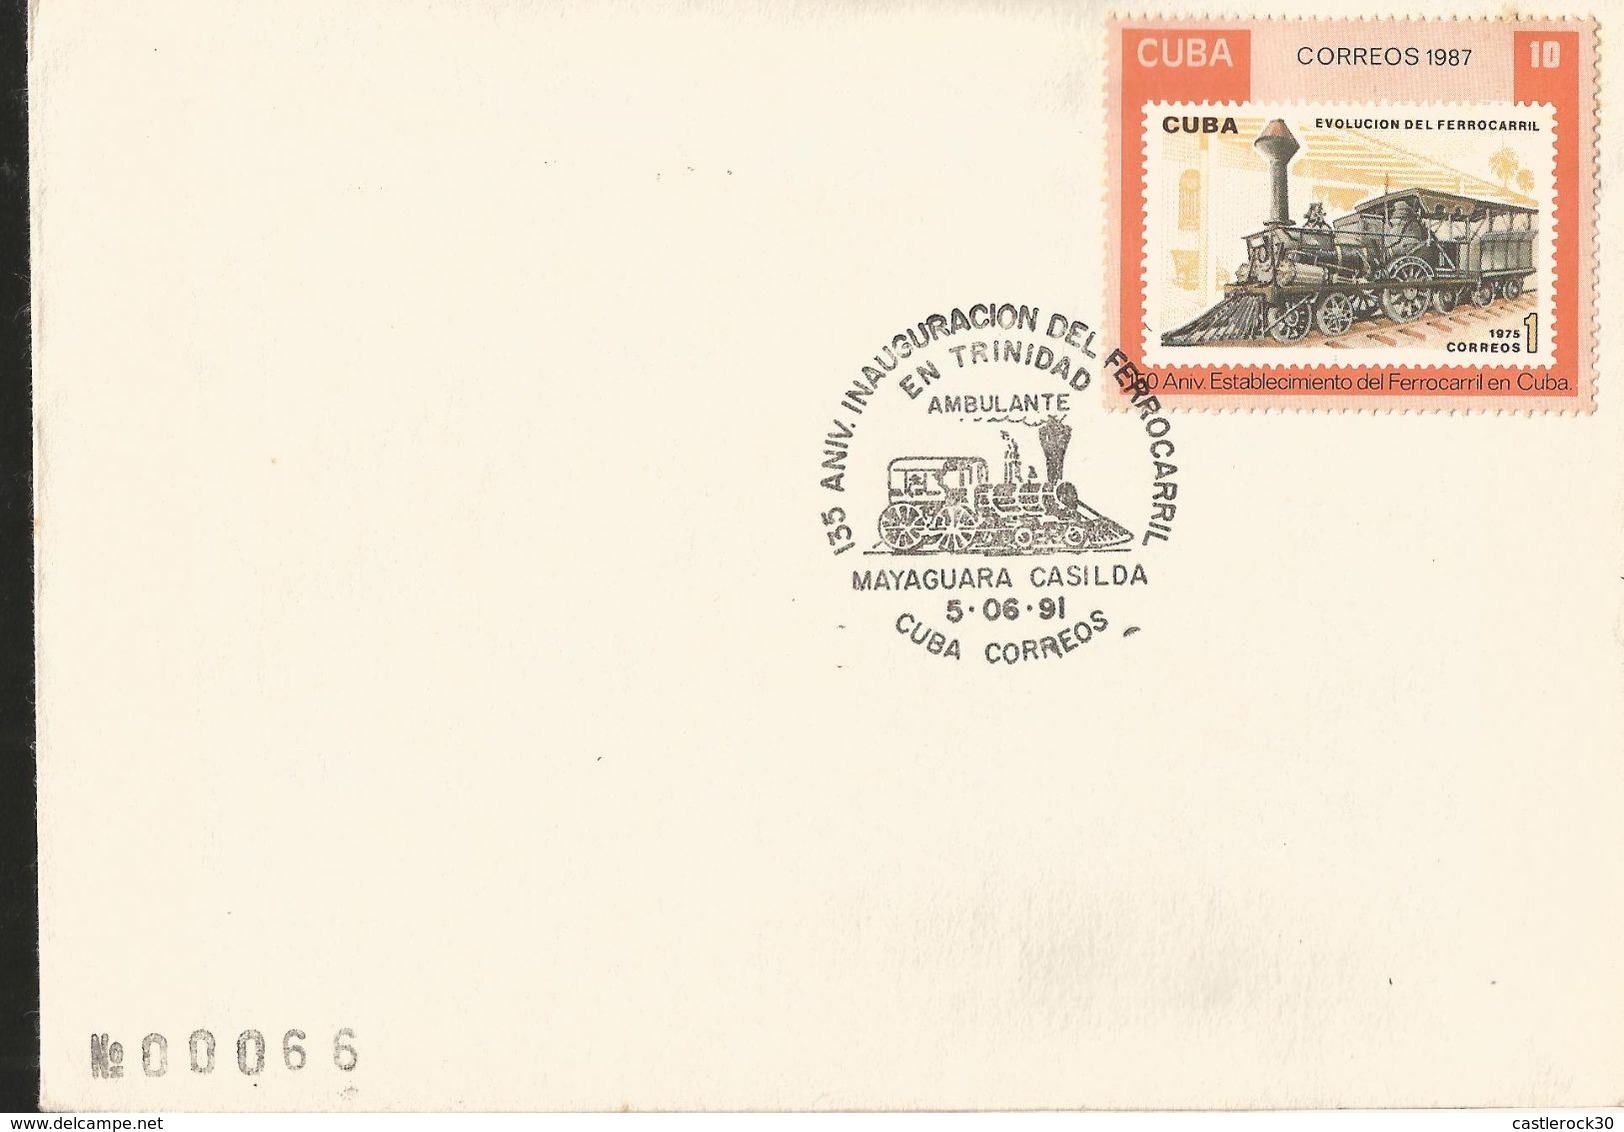 J) 1987 CUBA-CARIBE, RAYLWAY EVOLUTION, 150th ANNIVERSARY OF THE ESTABLISHMENT OF THE RAILWAY, FDC - Lettres & Documents